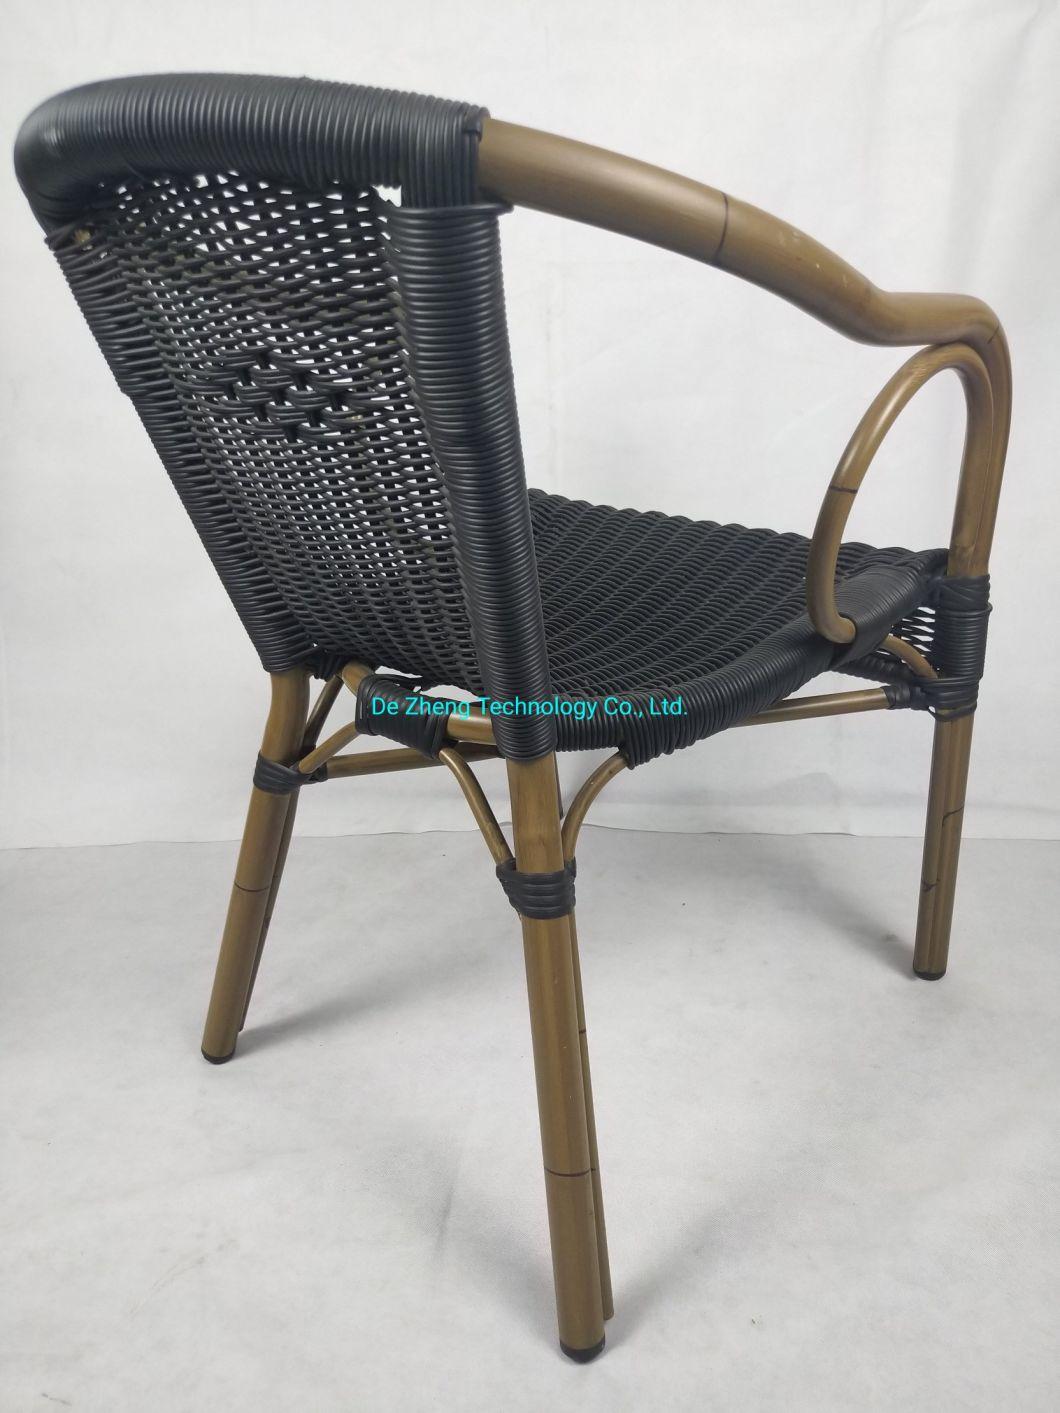 Paris Patio Garden Bistro Style Rain Resistance Rattan Dining Side Chair for Outdoor Restaurant Used